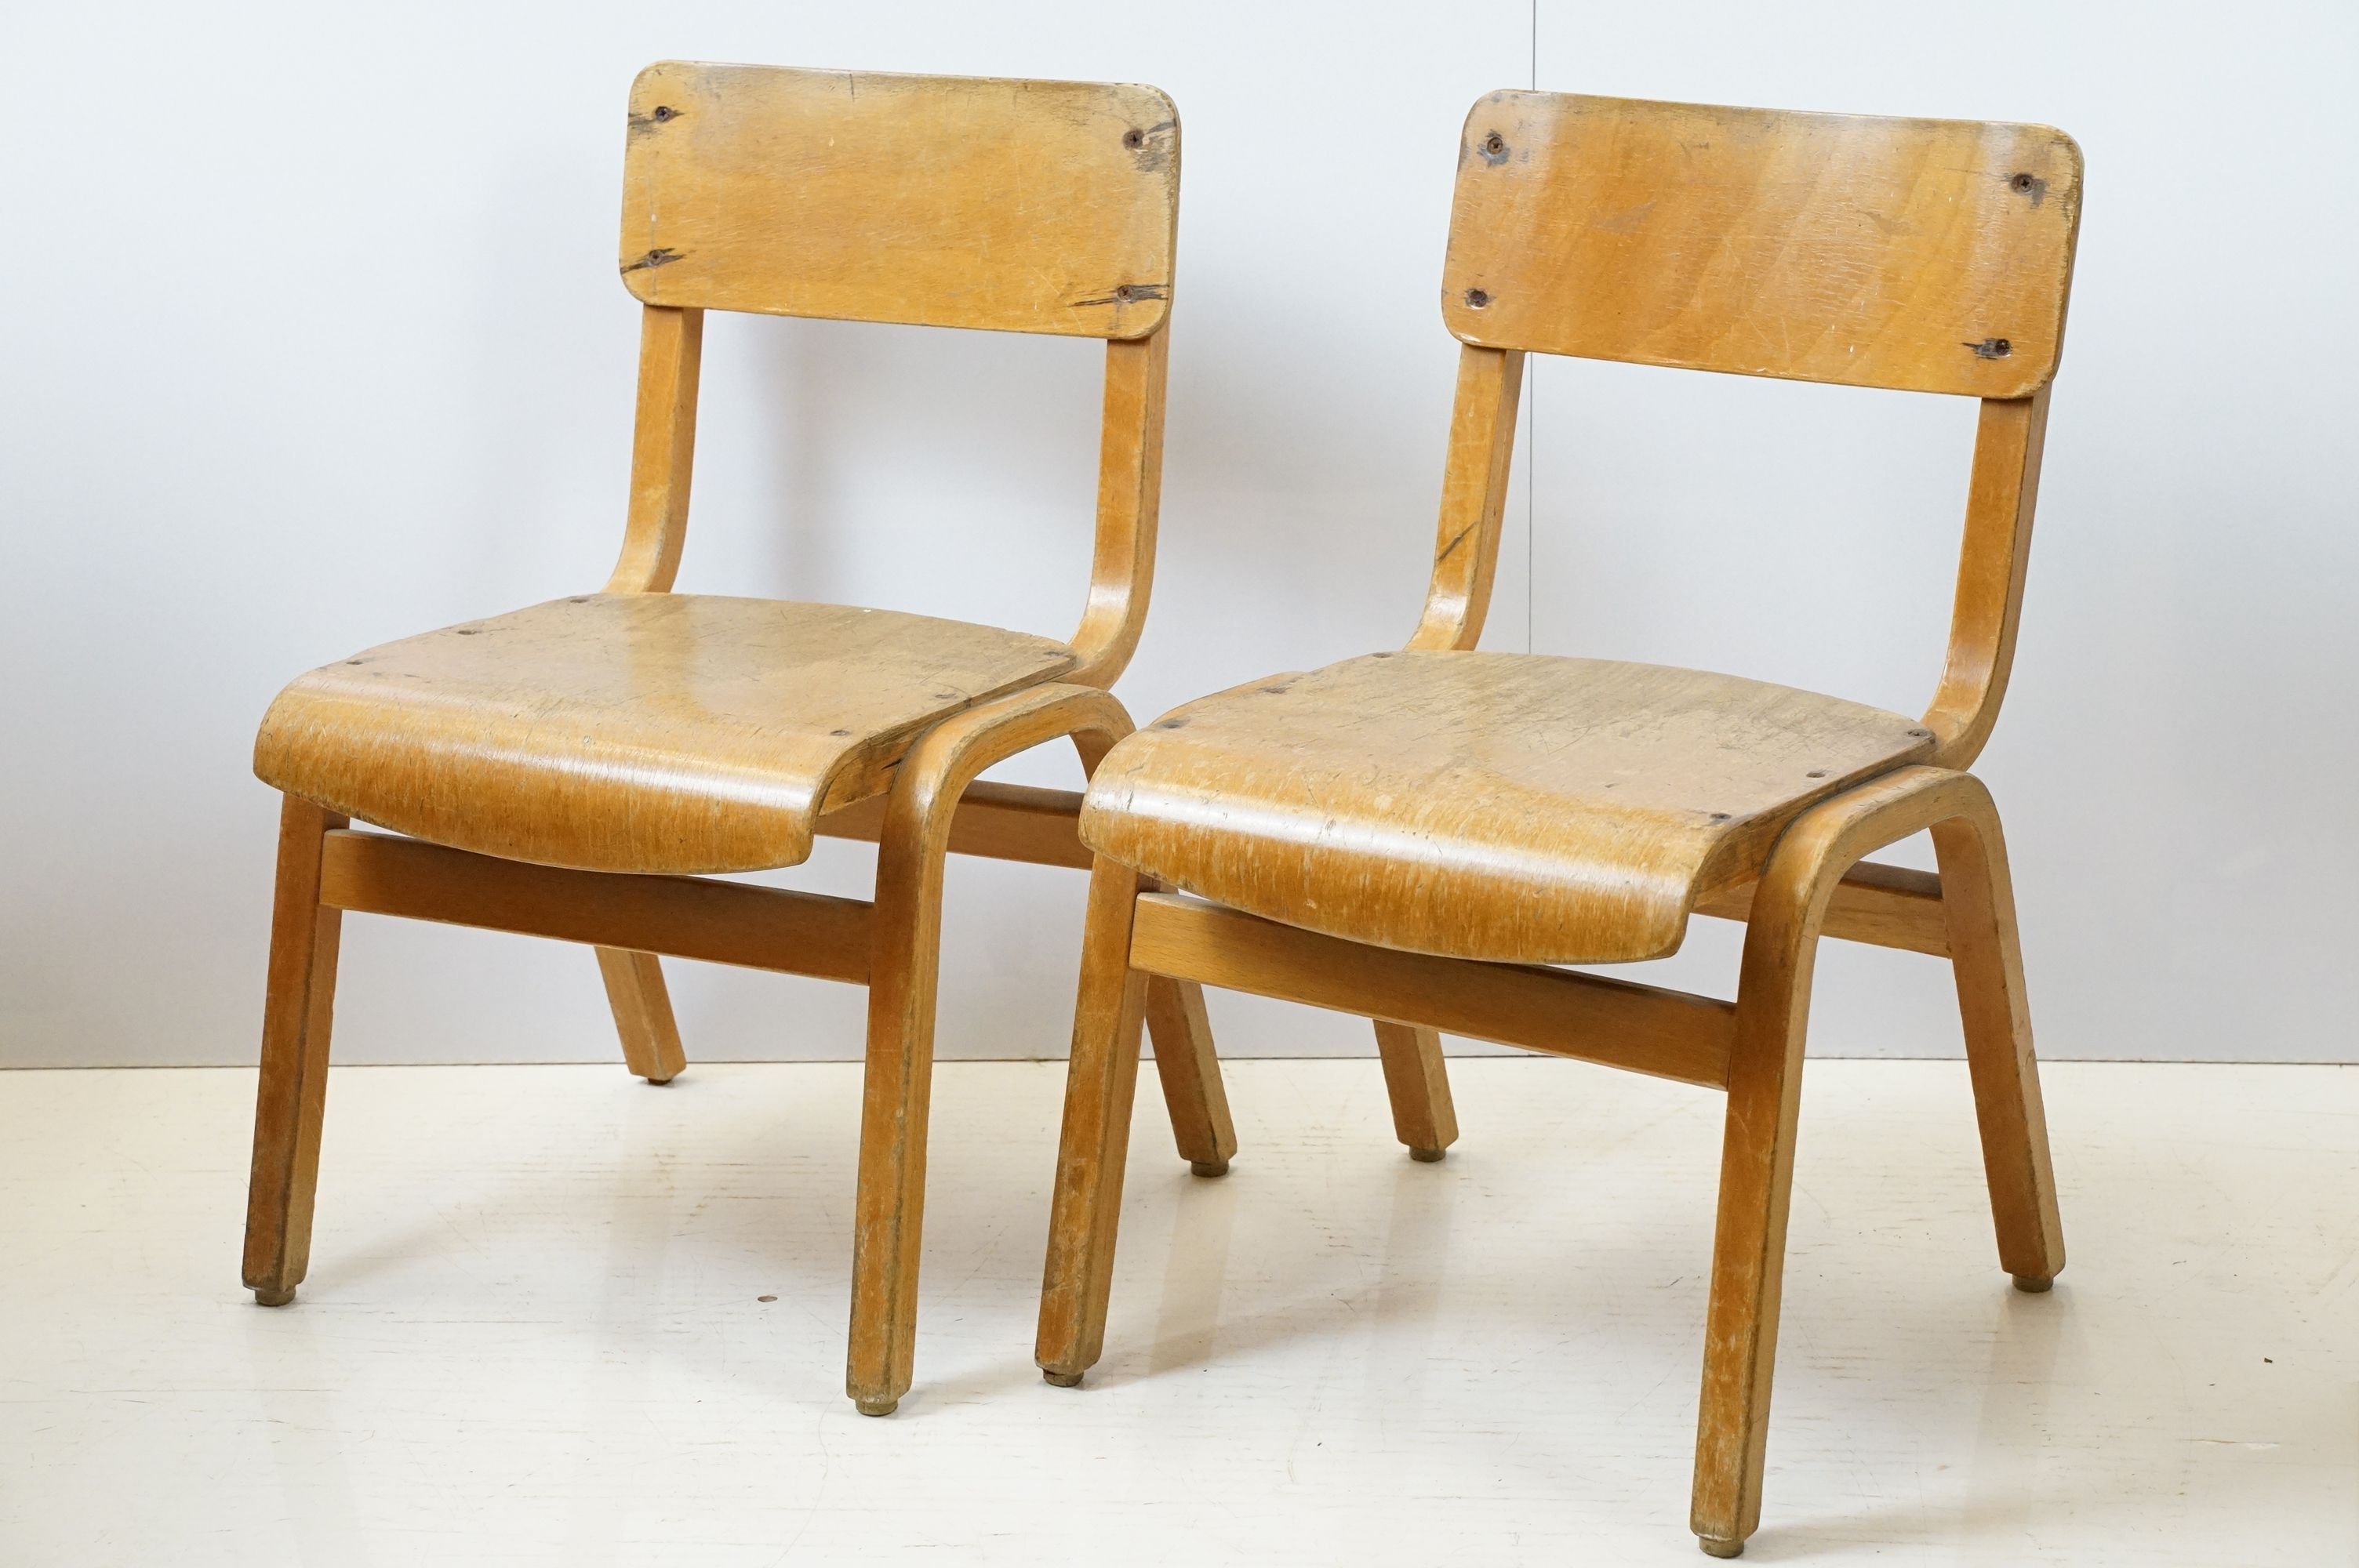 Two mid century school desks and chairs, the desks - 71cm high x 60.5cm wide x 50.5cm deep - Image 9 of 14